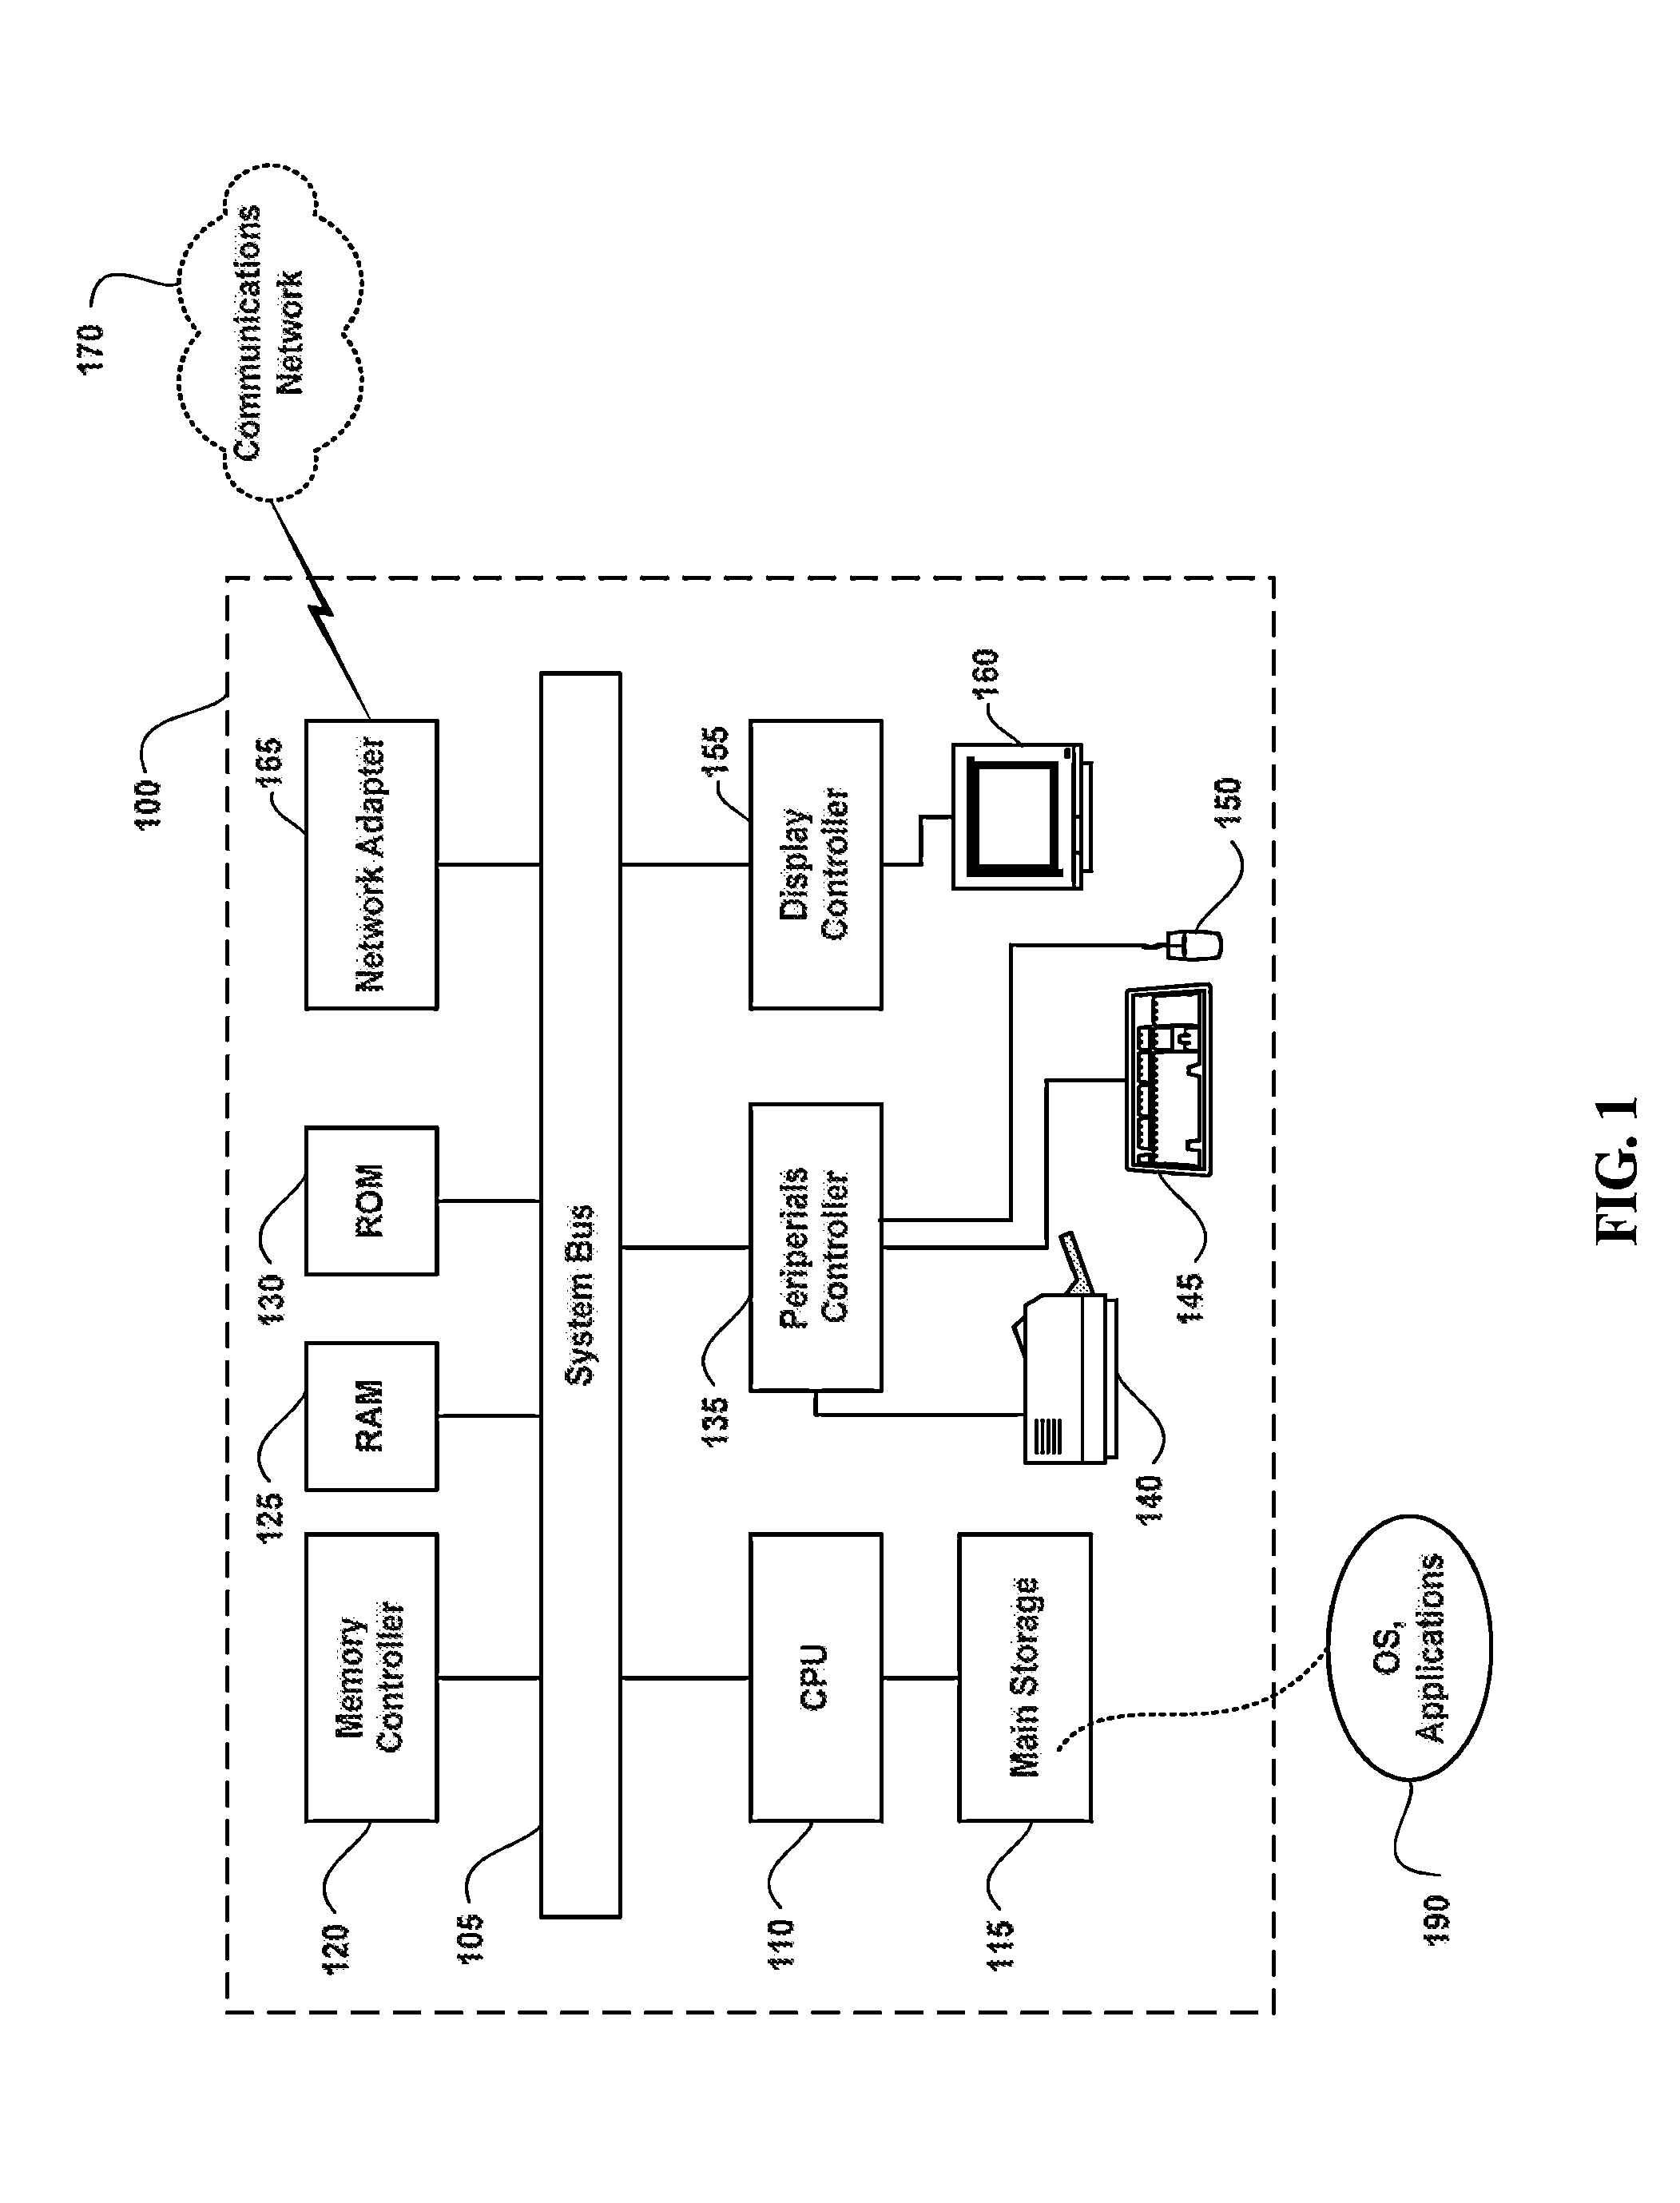 Computer-based system and method for flexible project management